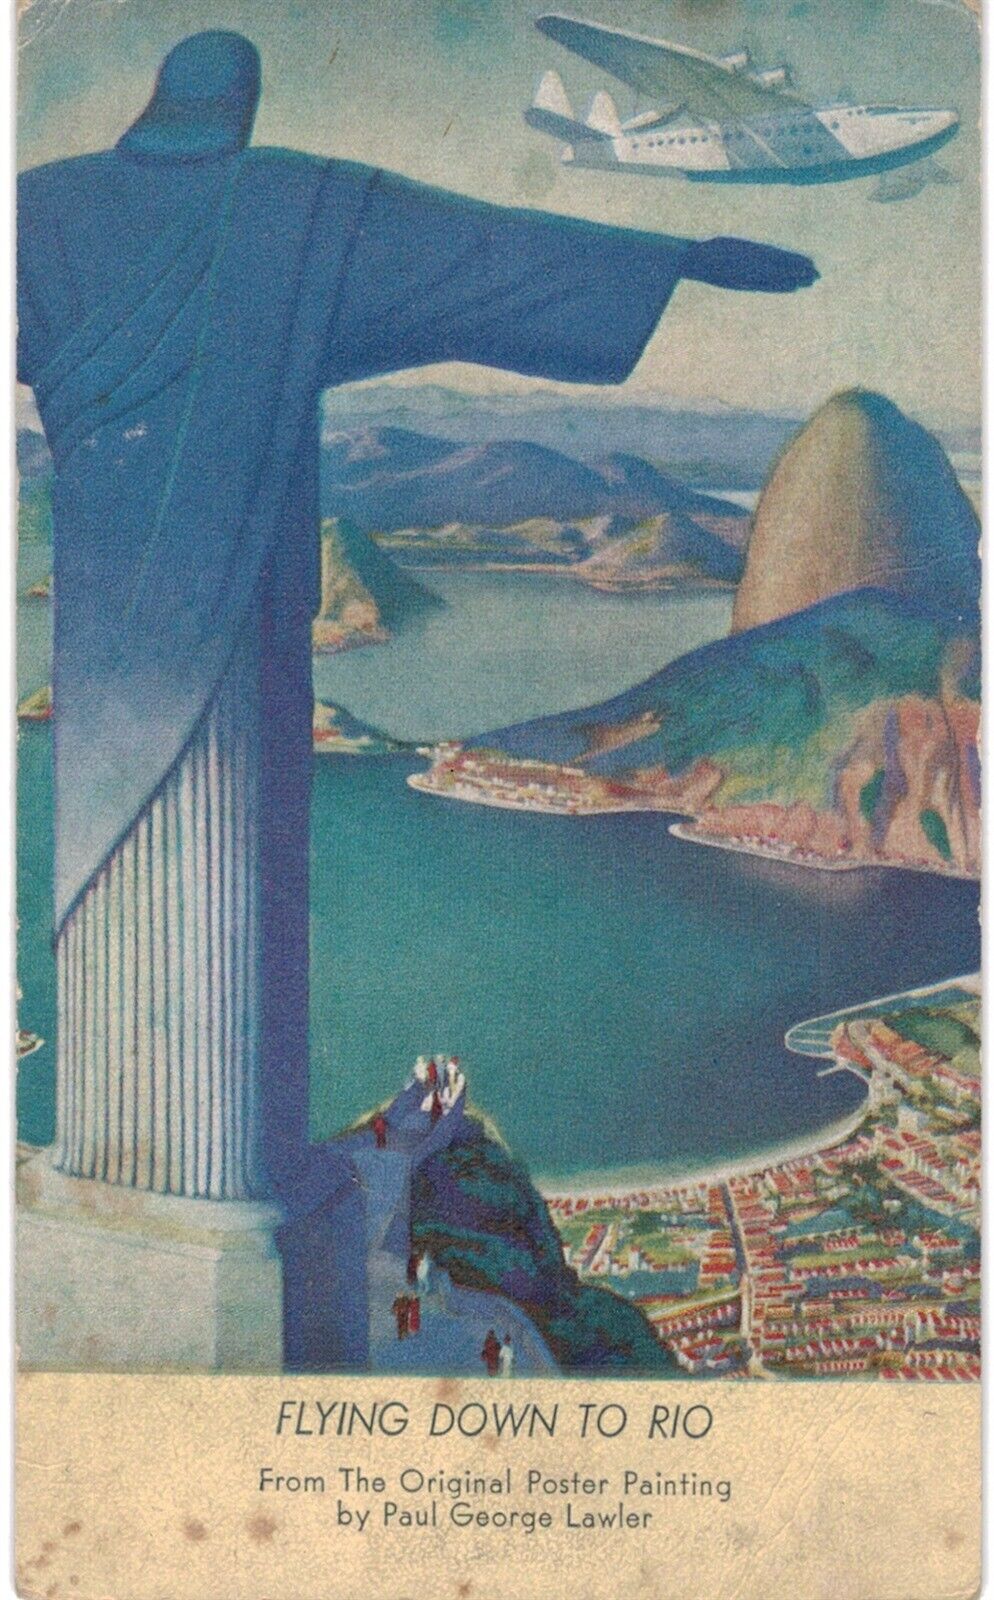 Flying Down To Rio Poster Painting Paul Lawlor 1950 Aviation Brazil 